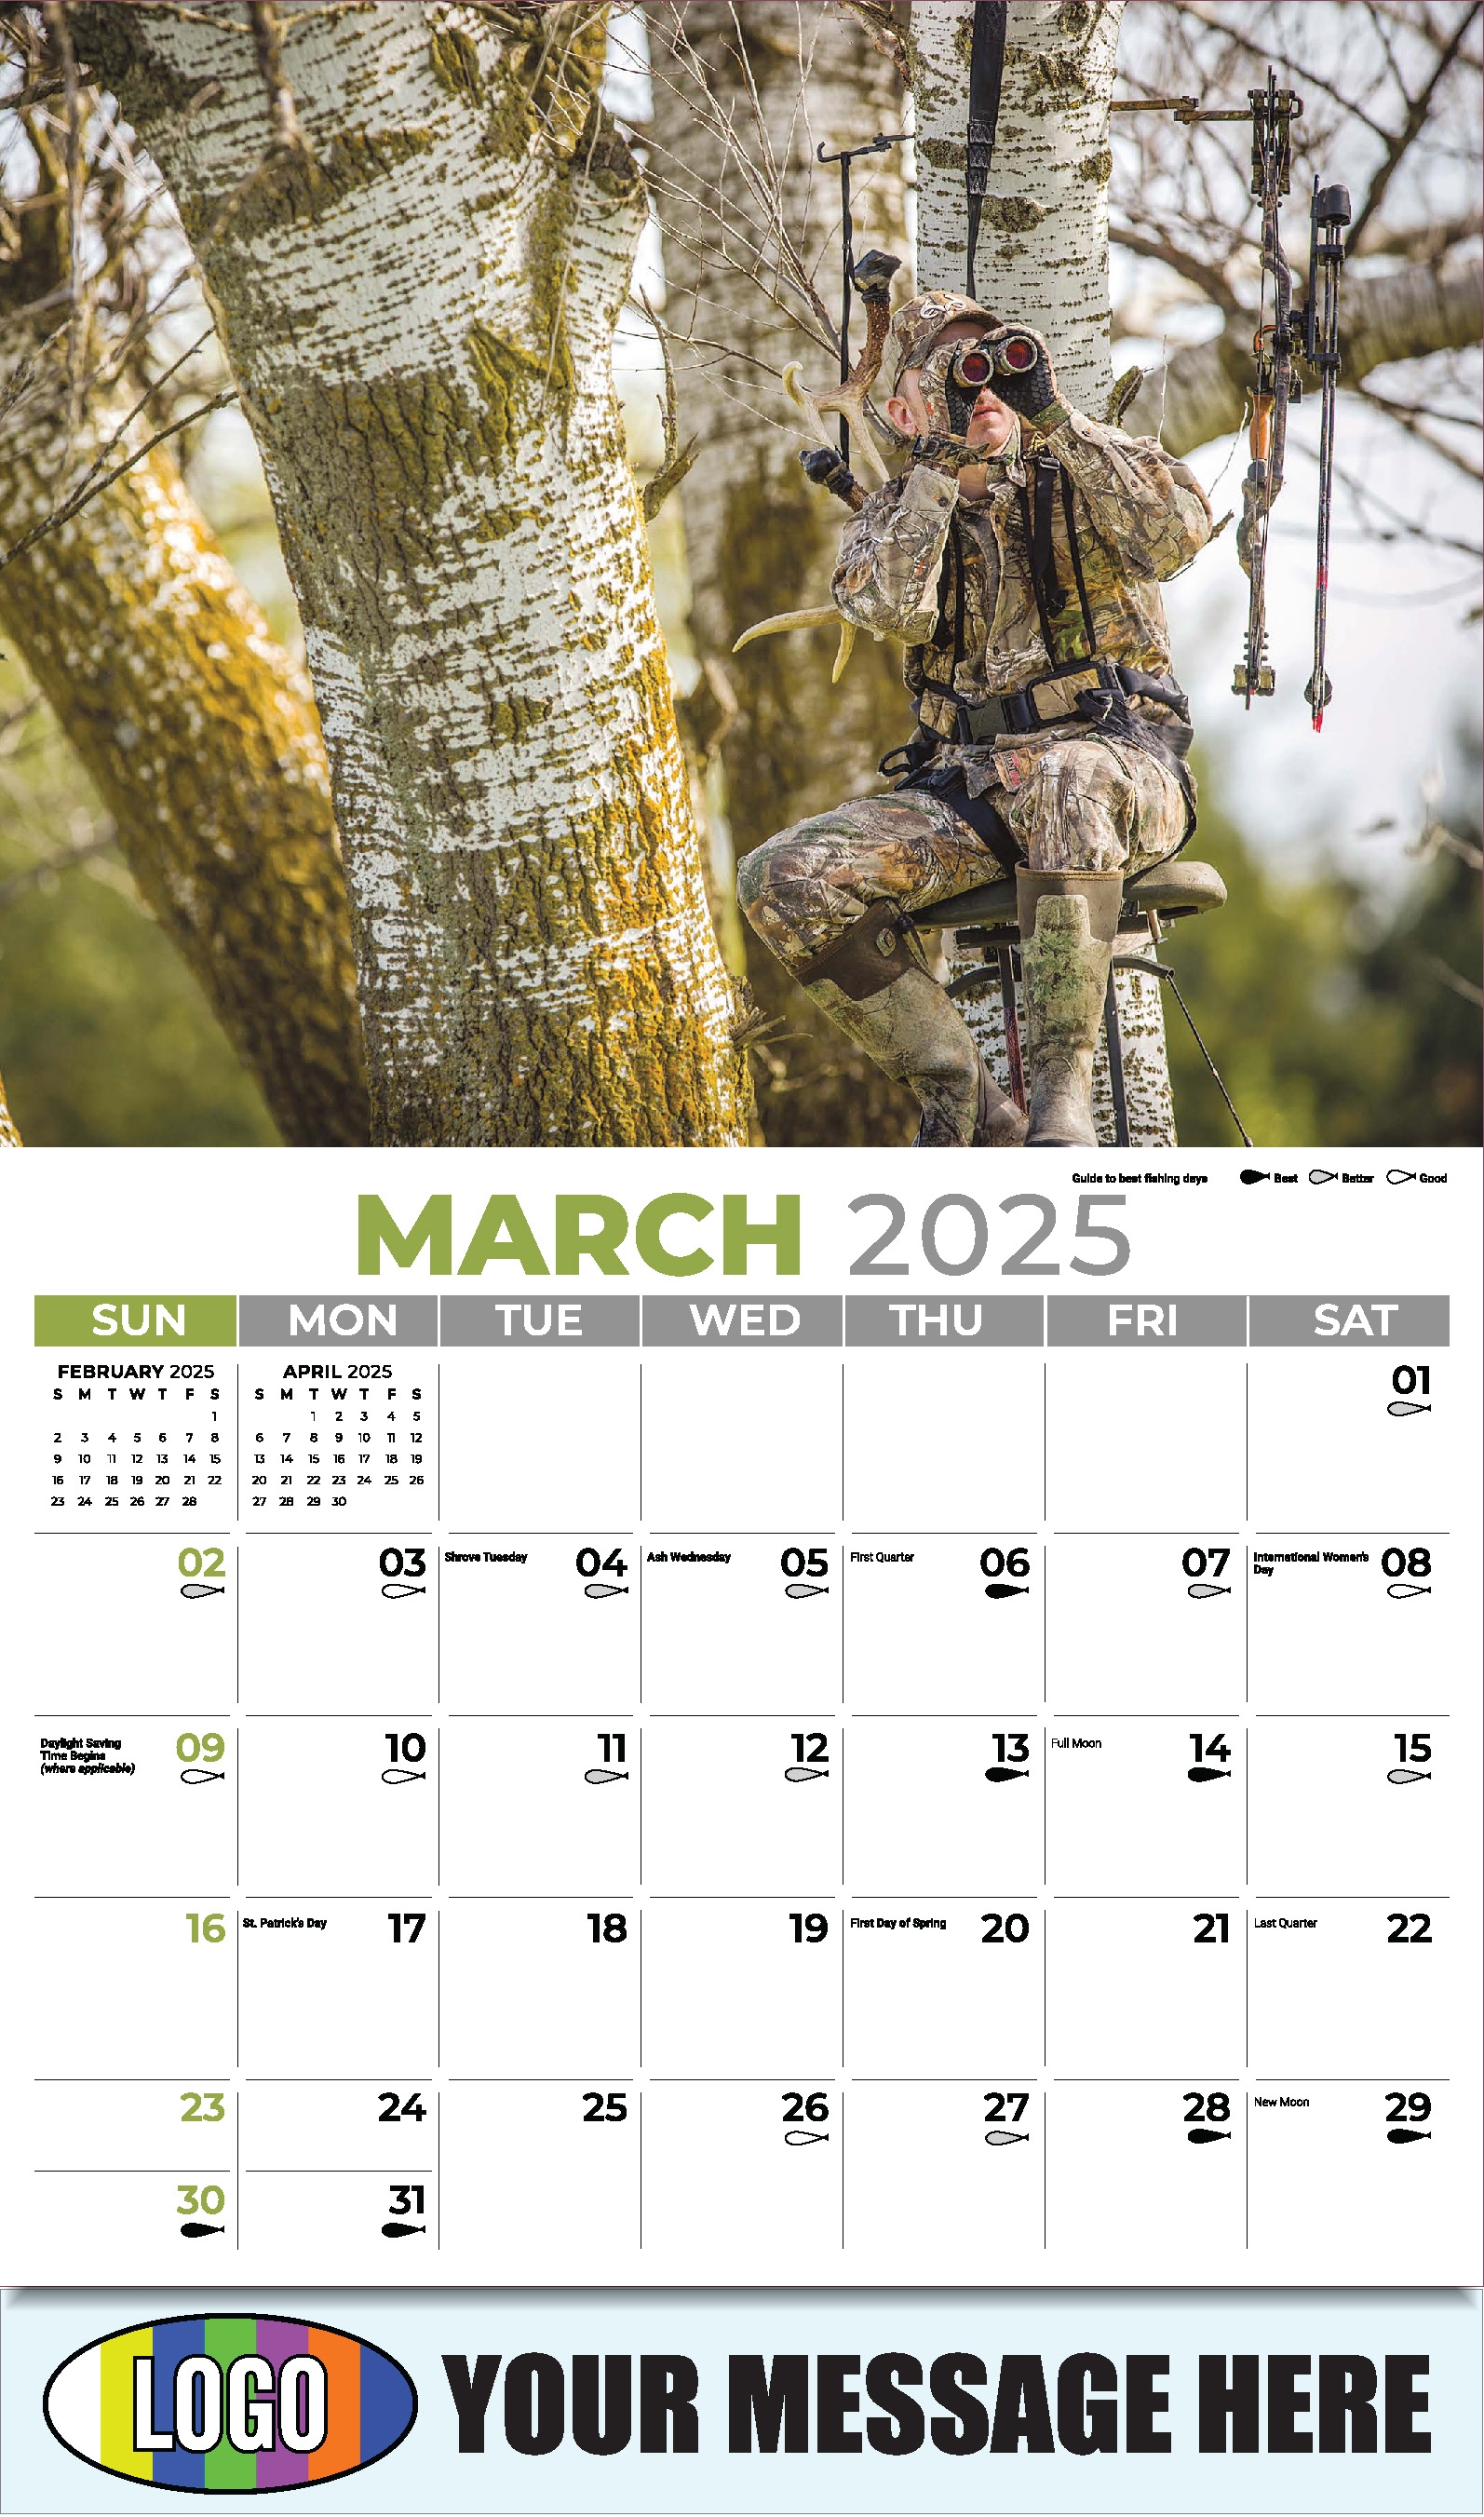 Fishing and Hunting 2025 Business Promotion Calendar - March